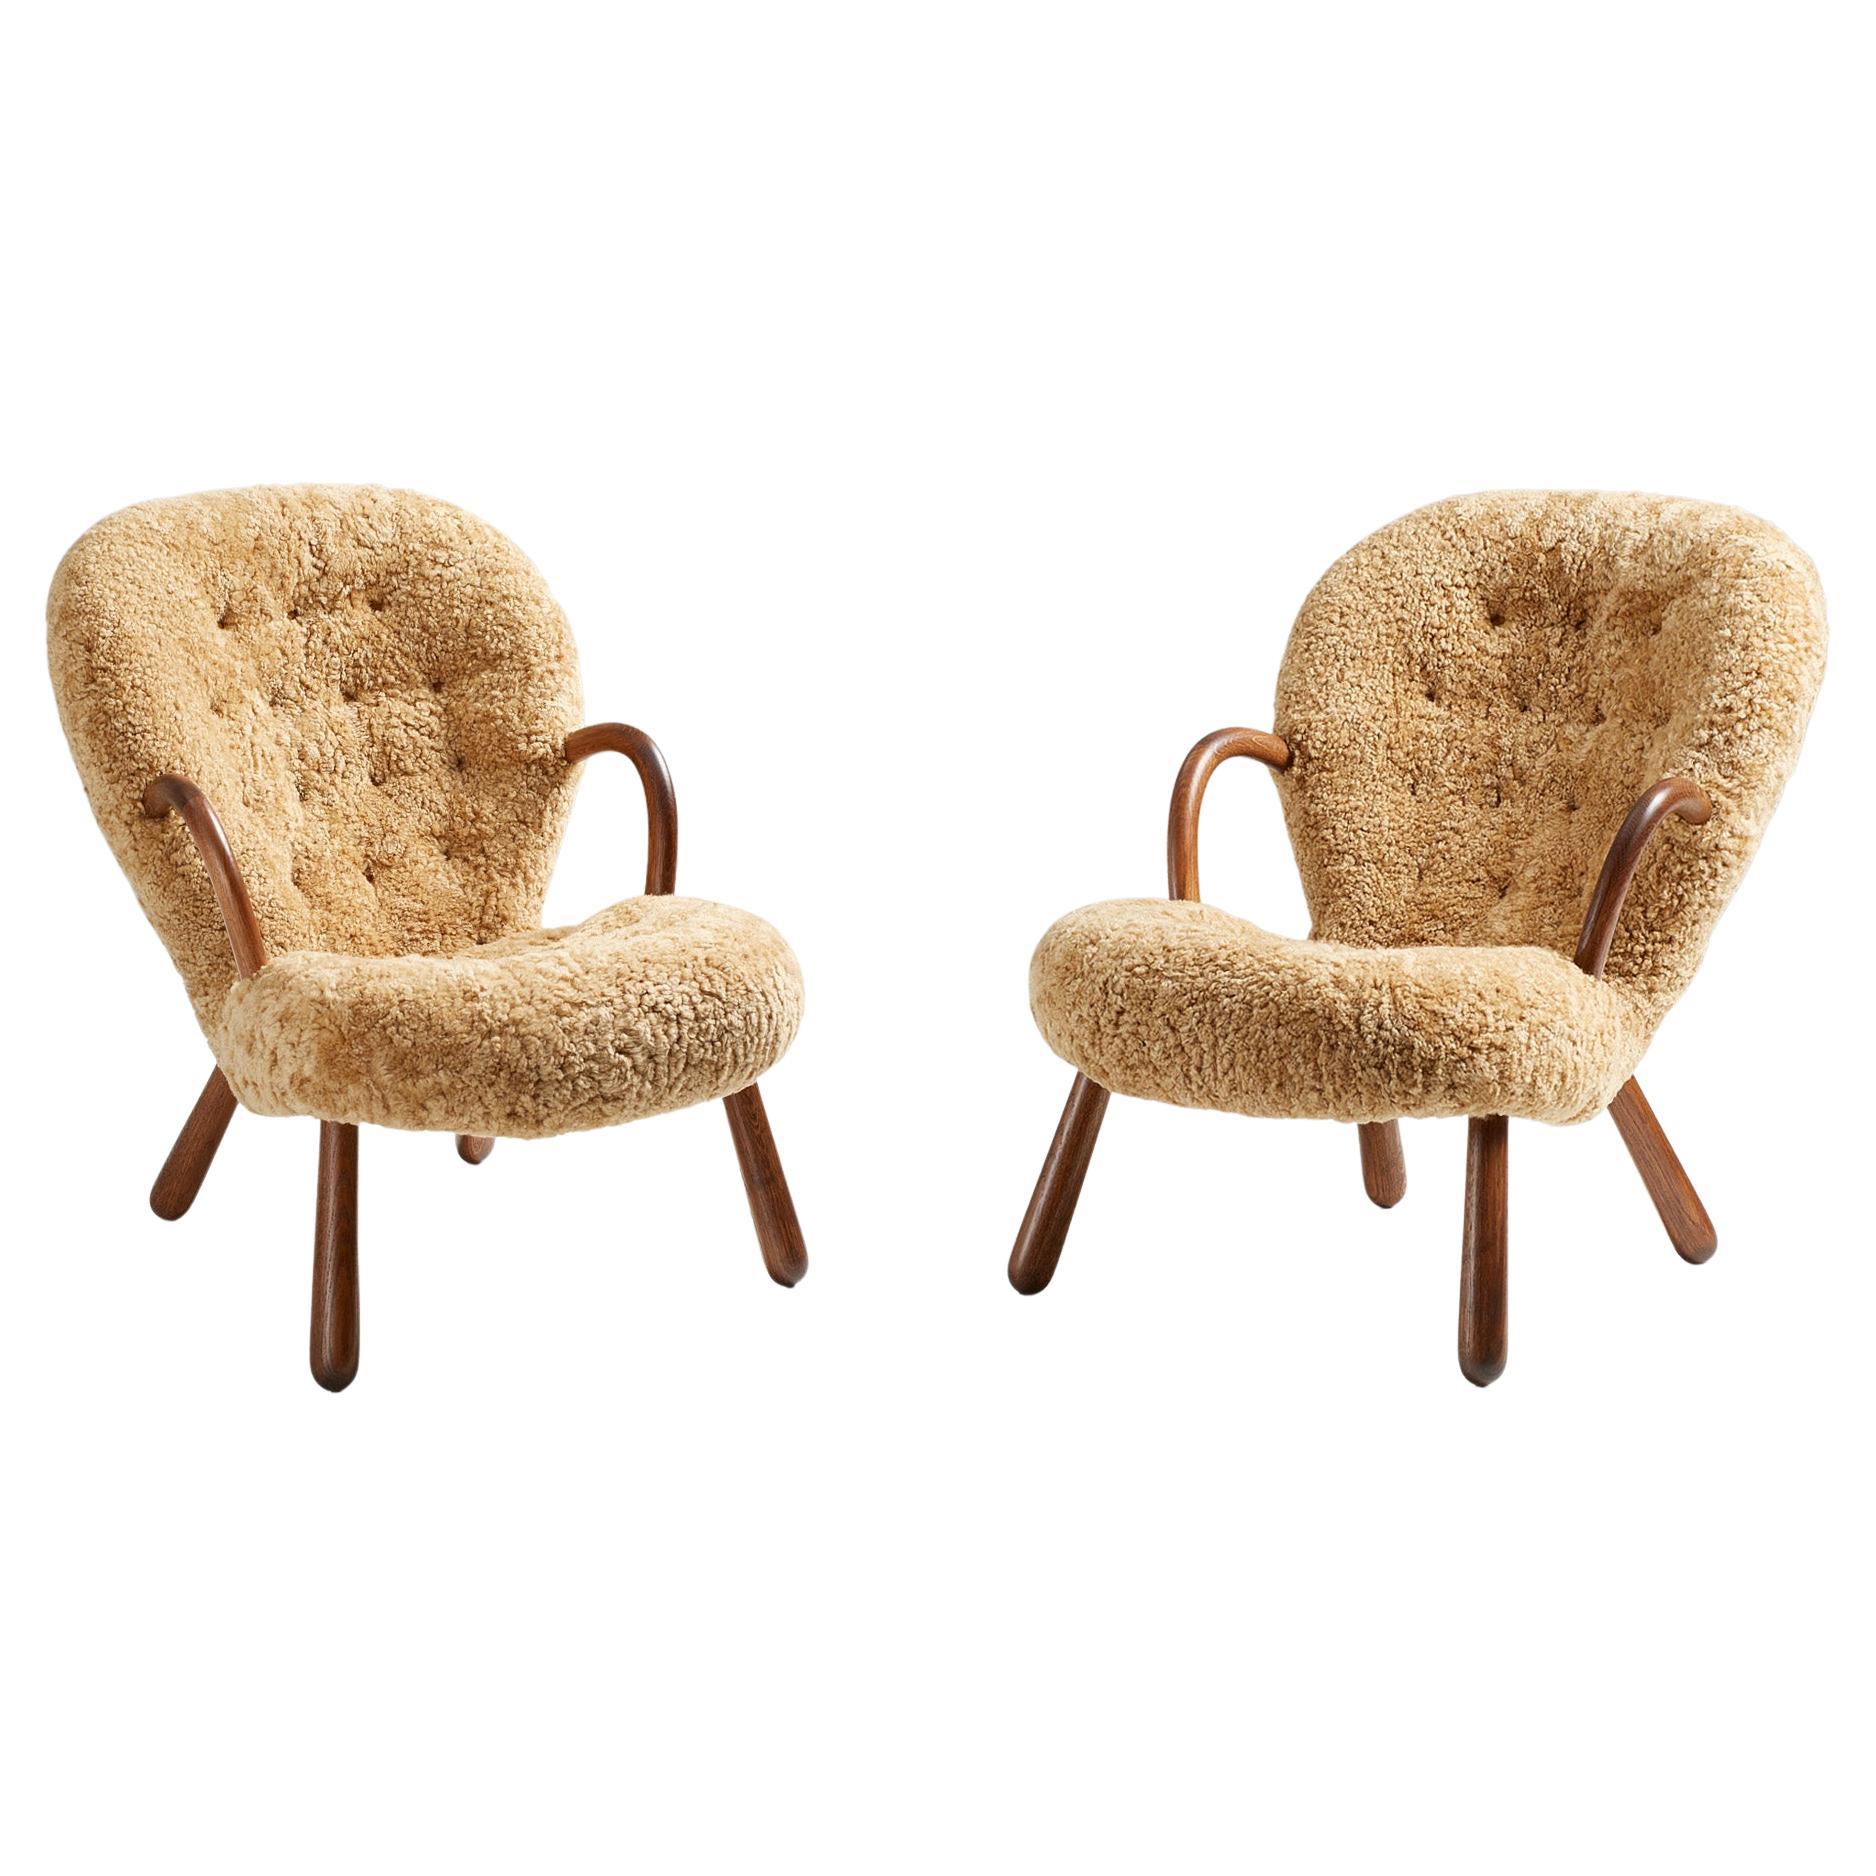 Re-Edition Sheepskin Clam Chairs by Arnold Madsen For Sale